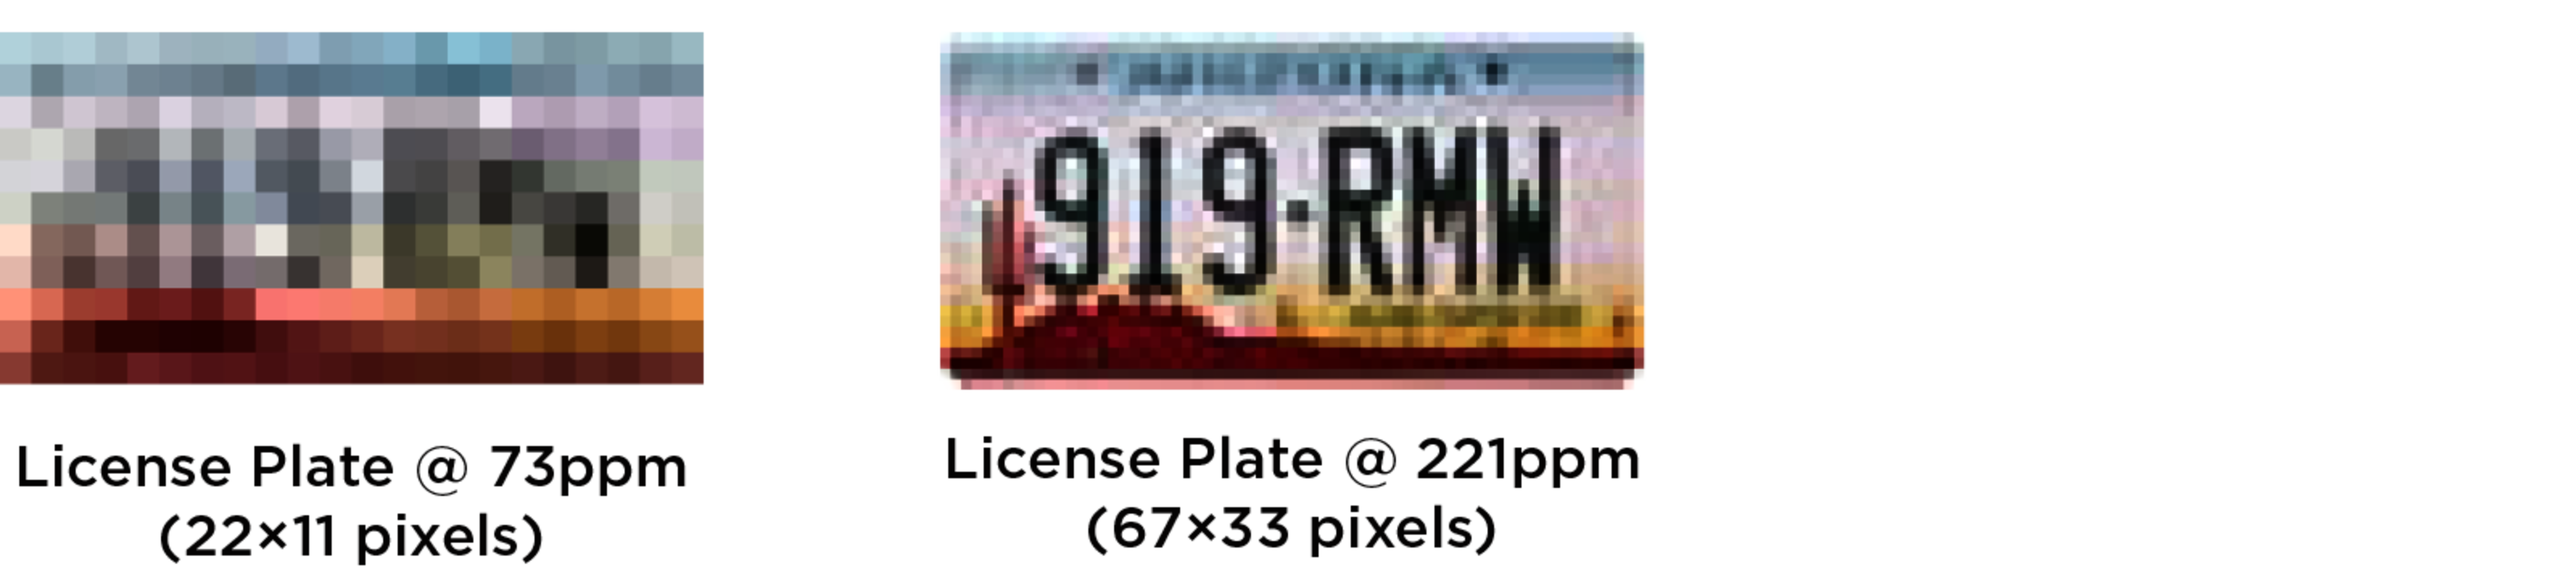 License Plate Example at 73ppm vs 221ppm